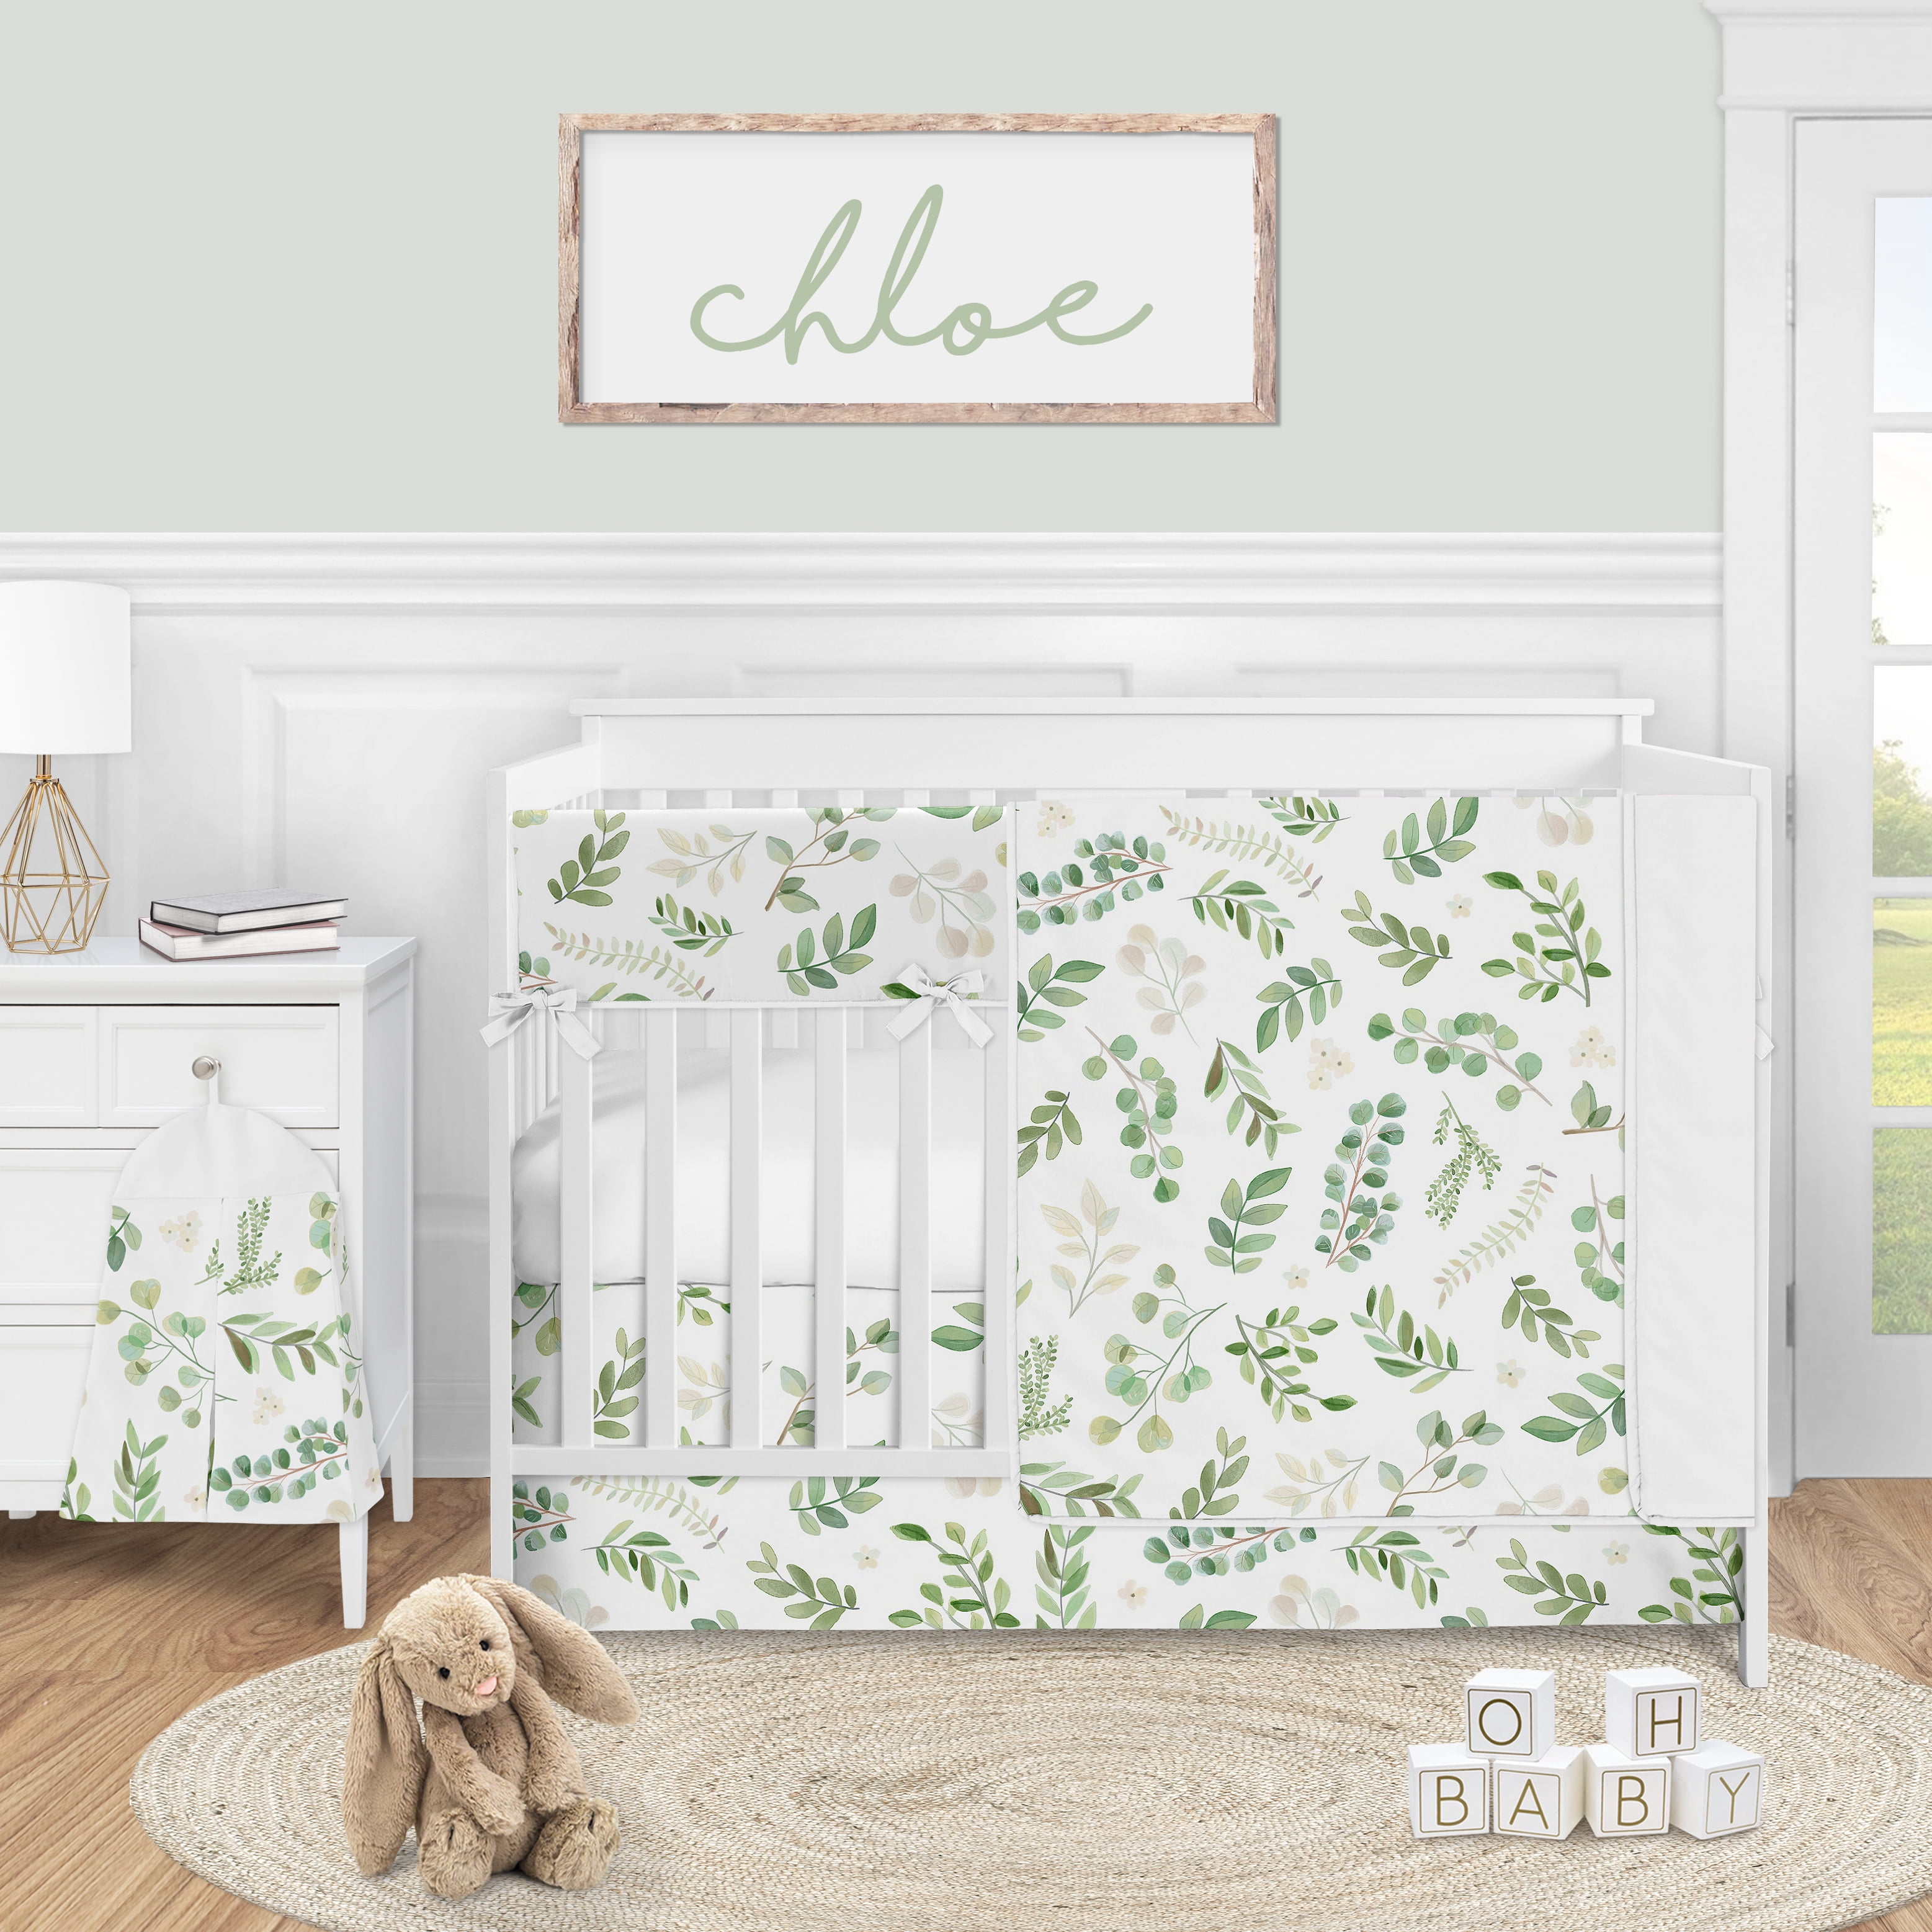 Sweet Jojo Designs Floral Leaf Girl Baby Nursery Changing Pad Cover Green and White Boho Watercolour Botanical Woodland Tropical Garden